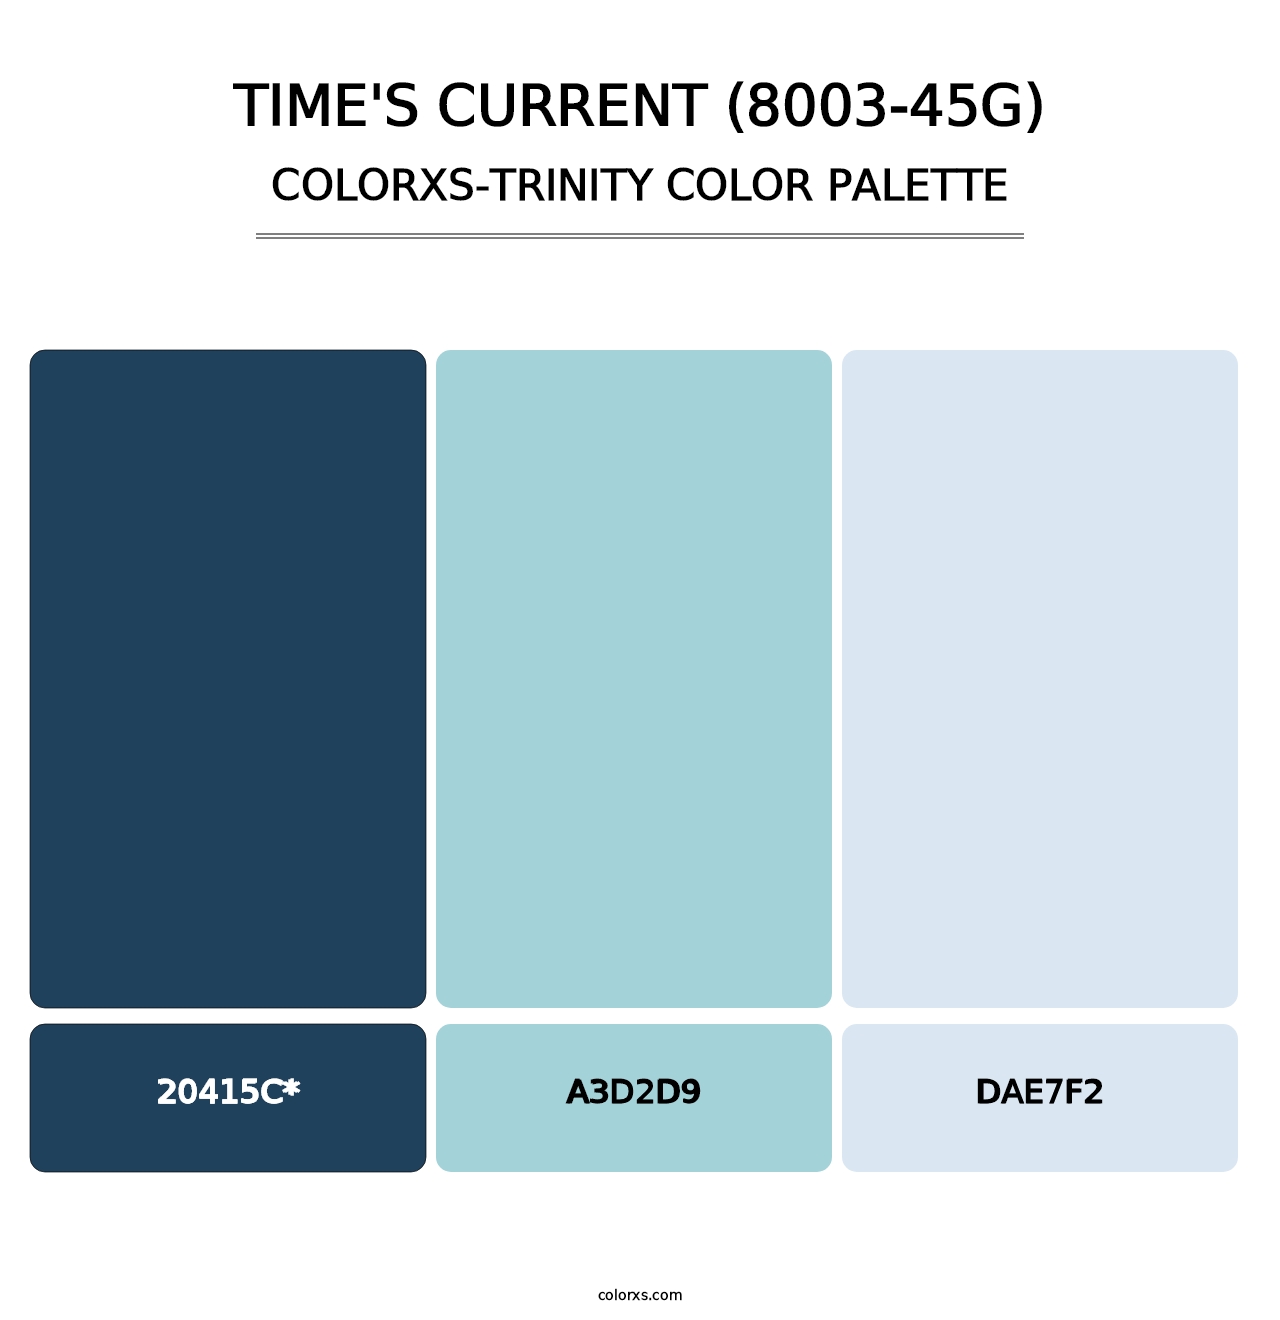 Time's Current (8003-45G) - Colorxs Trinity Palette